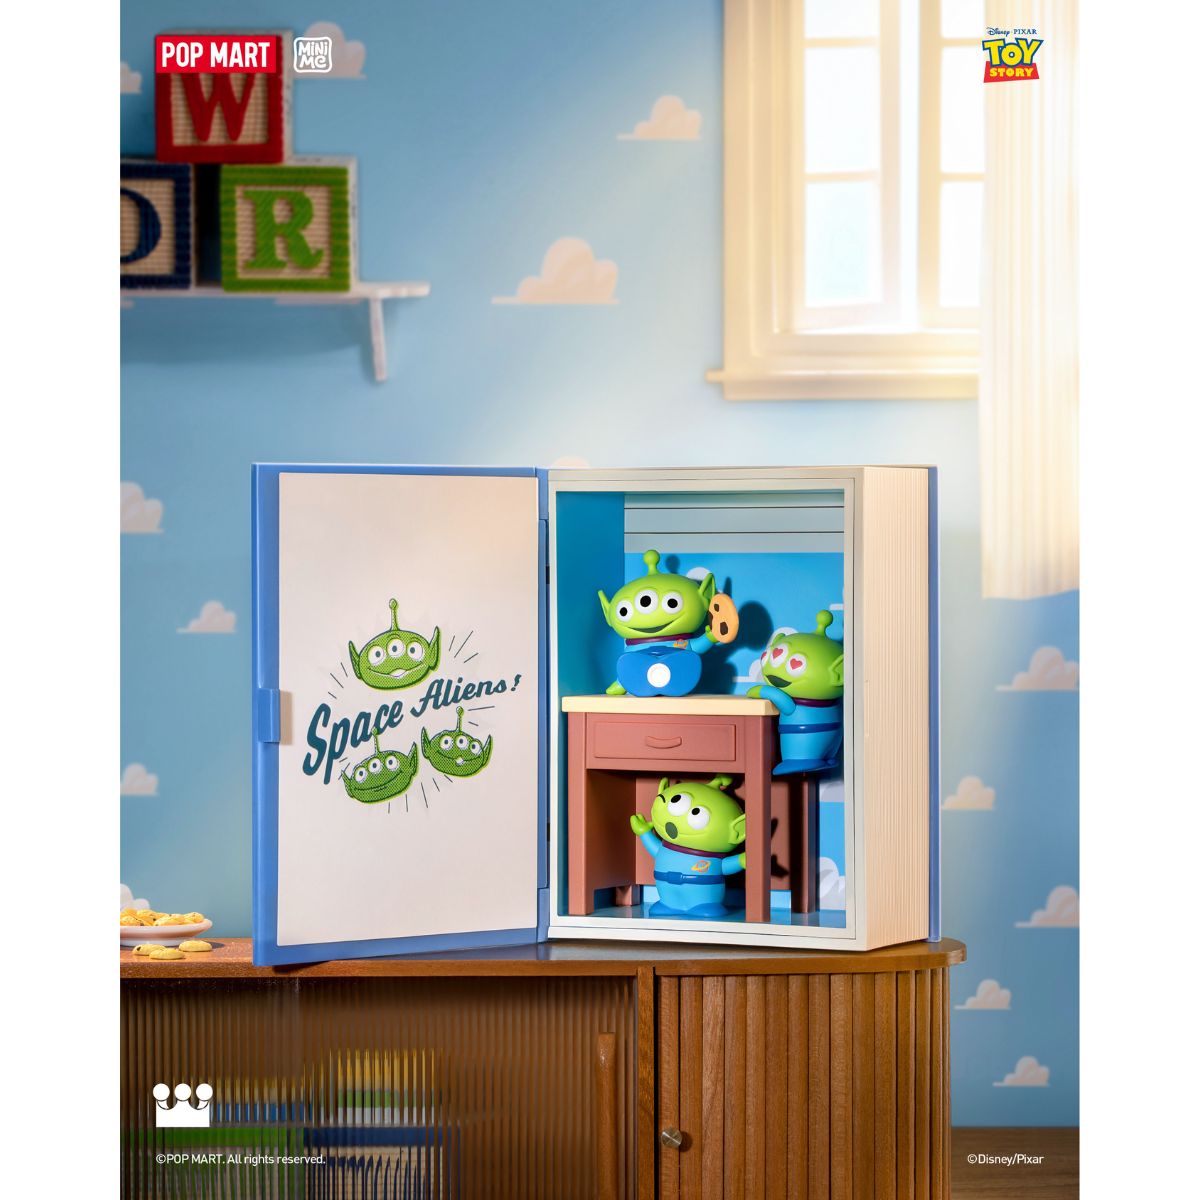 POP MART Toy Story: Andy's Room 6941848261960